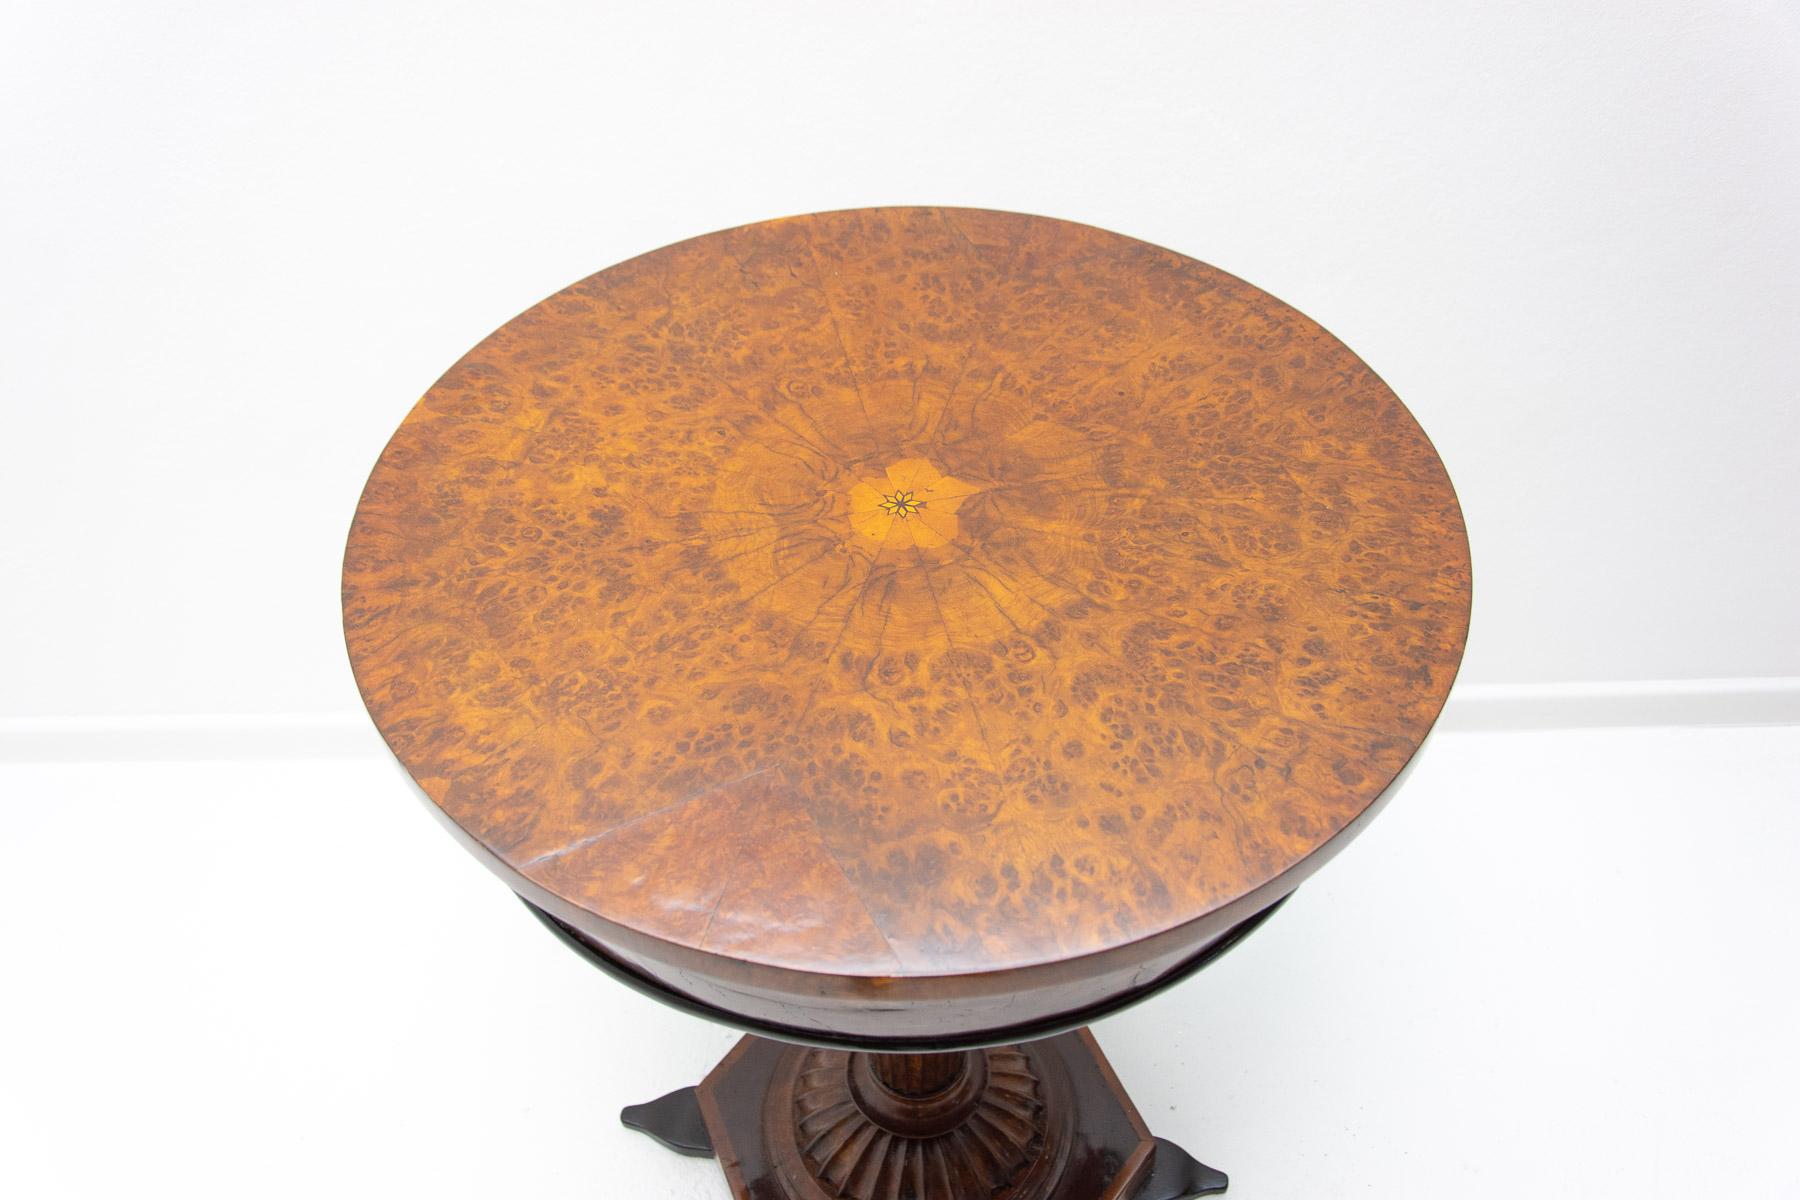 Completely Restored Neo-Baroque Card Table, Late 19th Century, Austria-Hungary For Sale 1